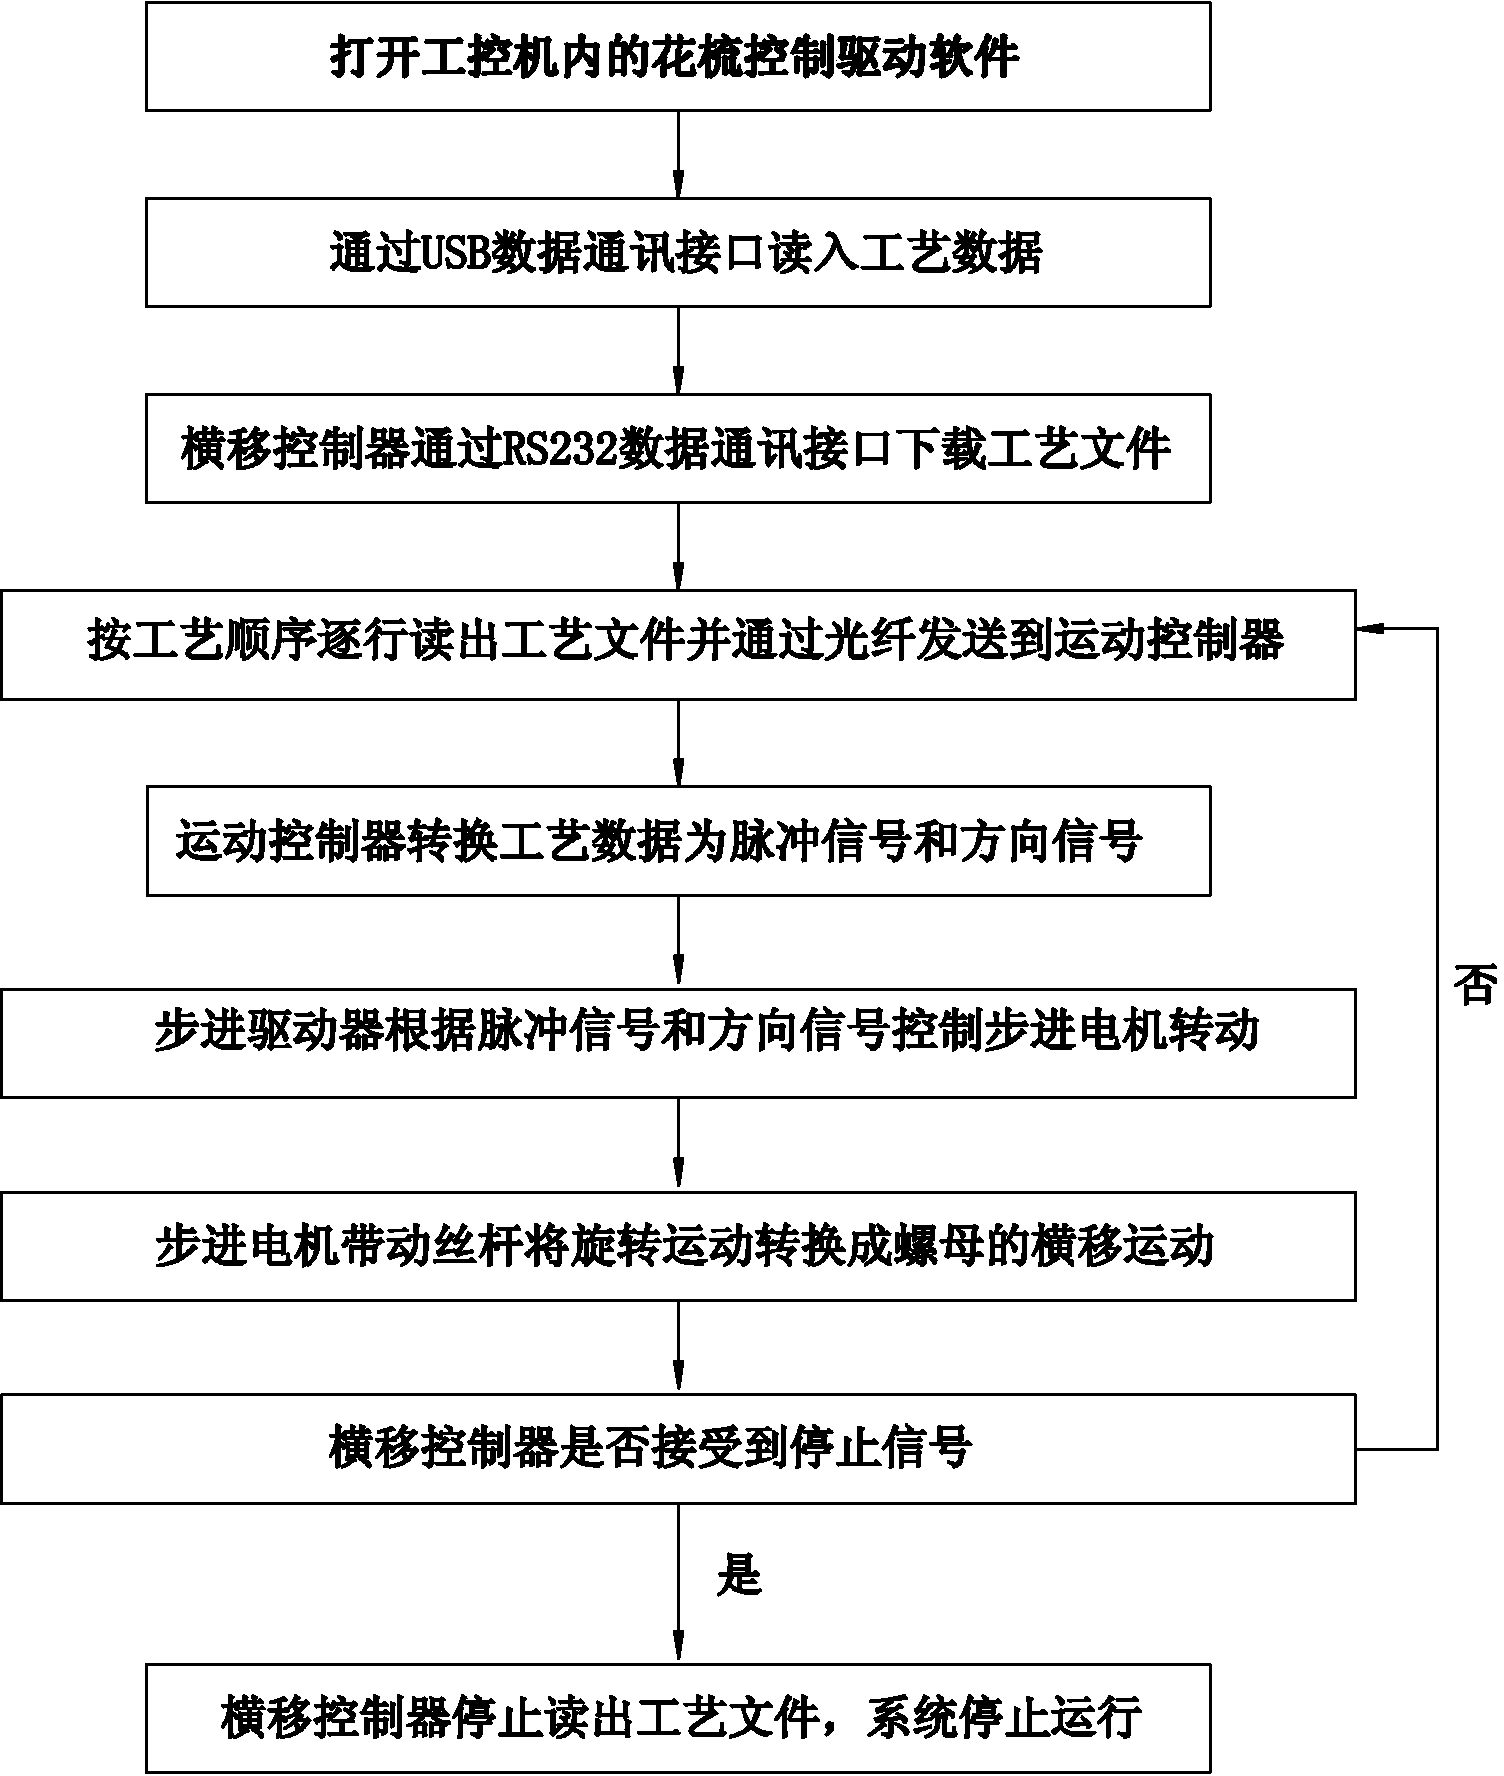 Electronic shogging control system and method used in warp knitting industry